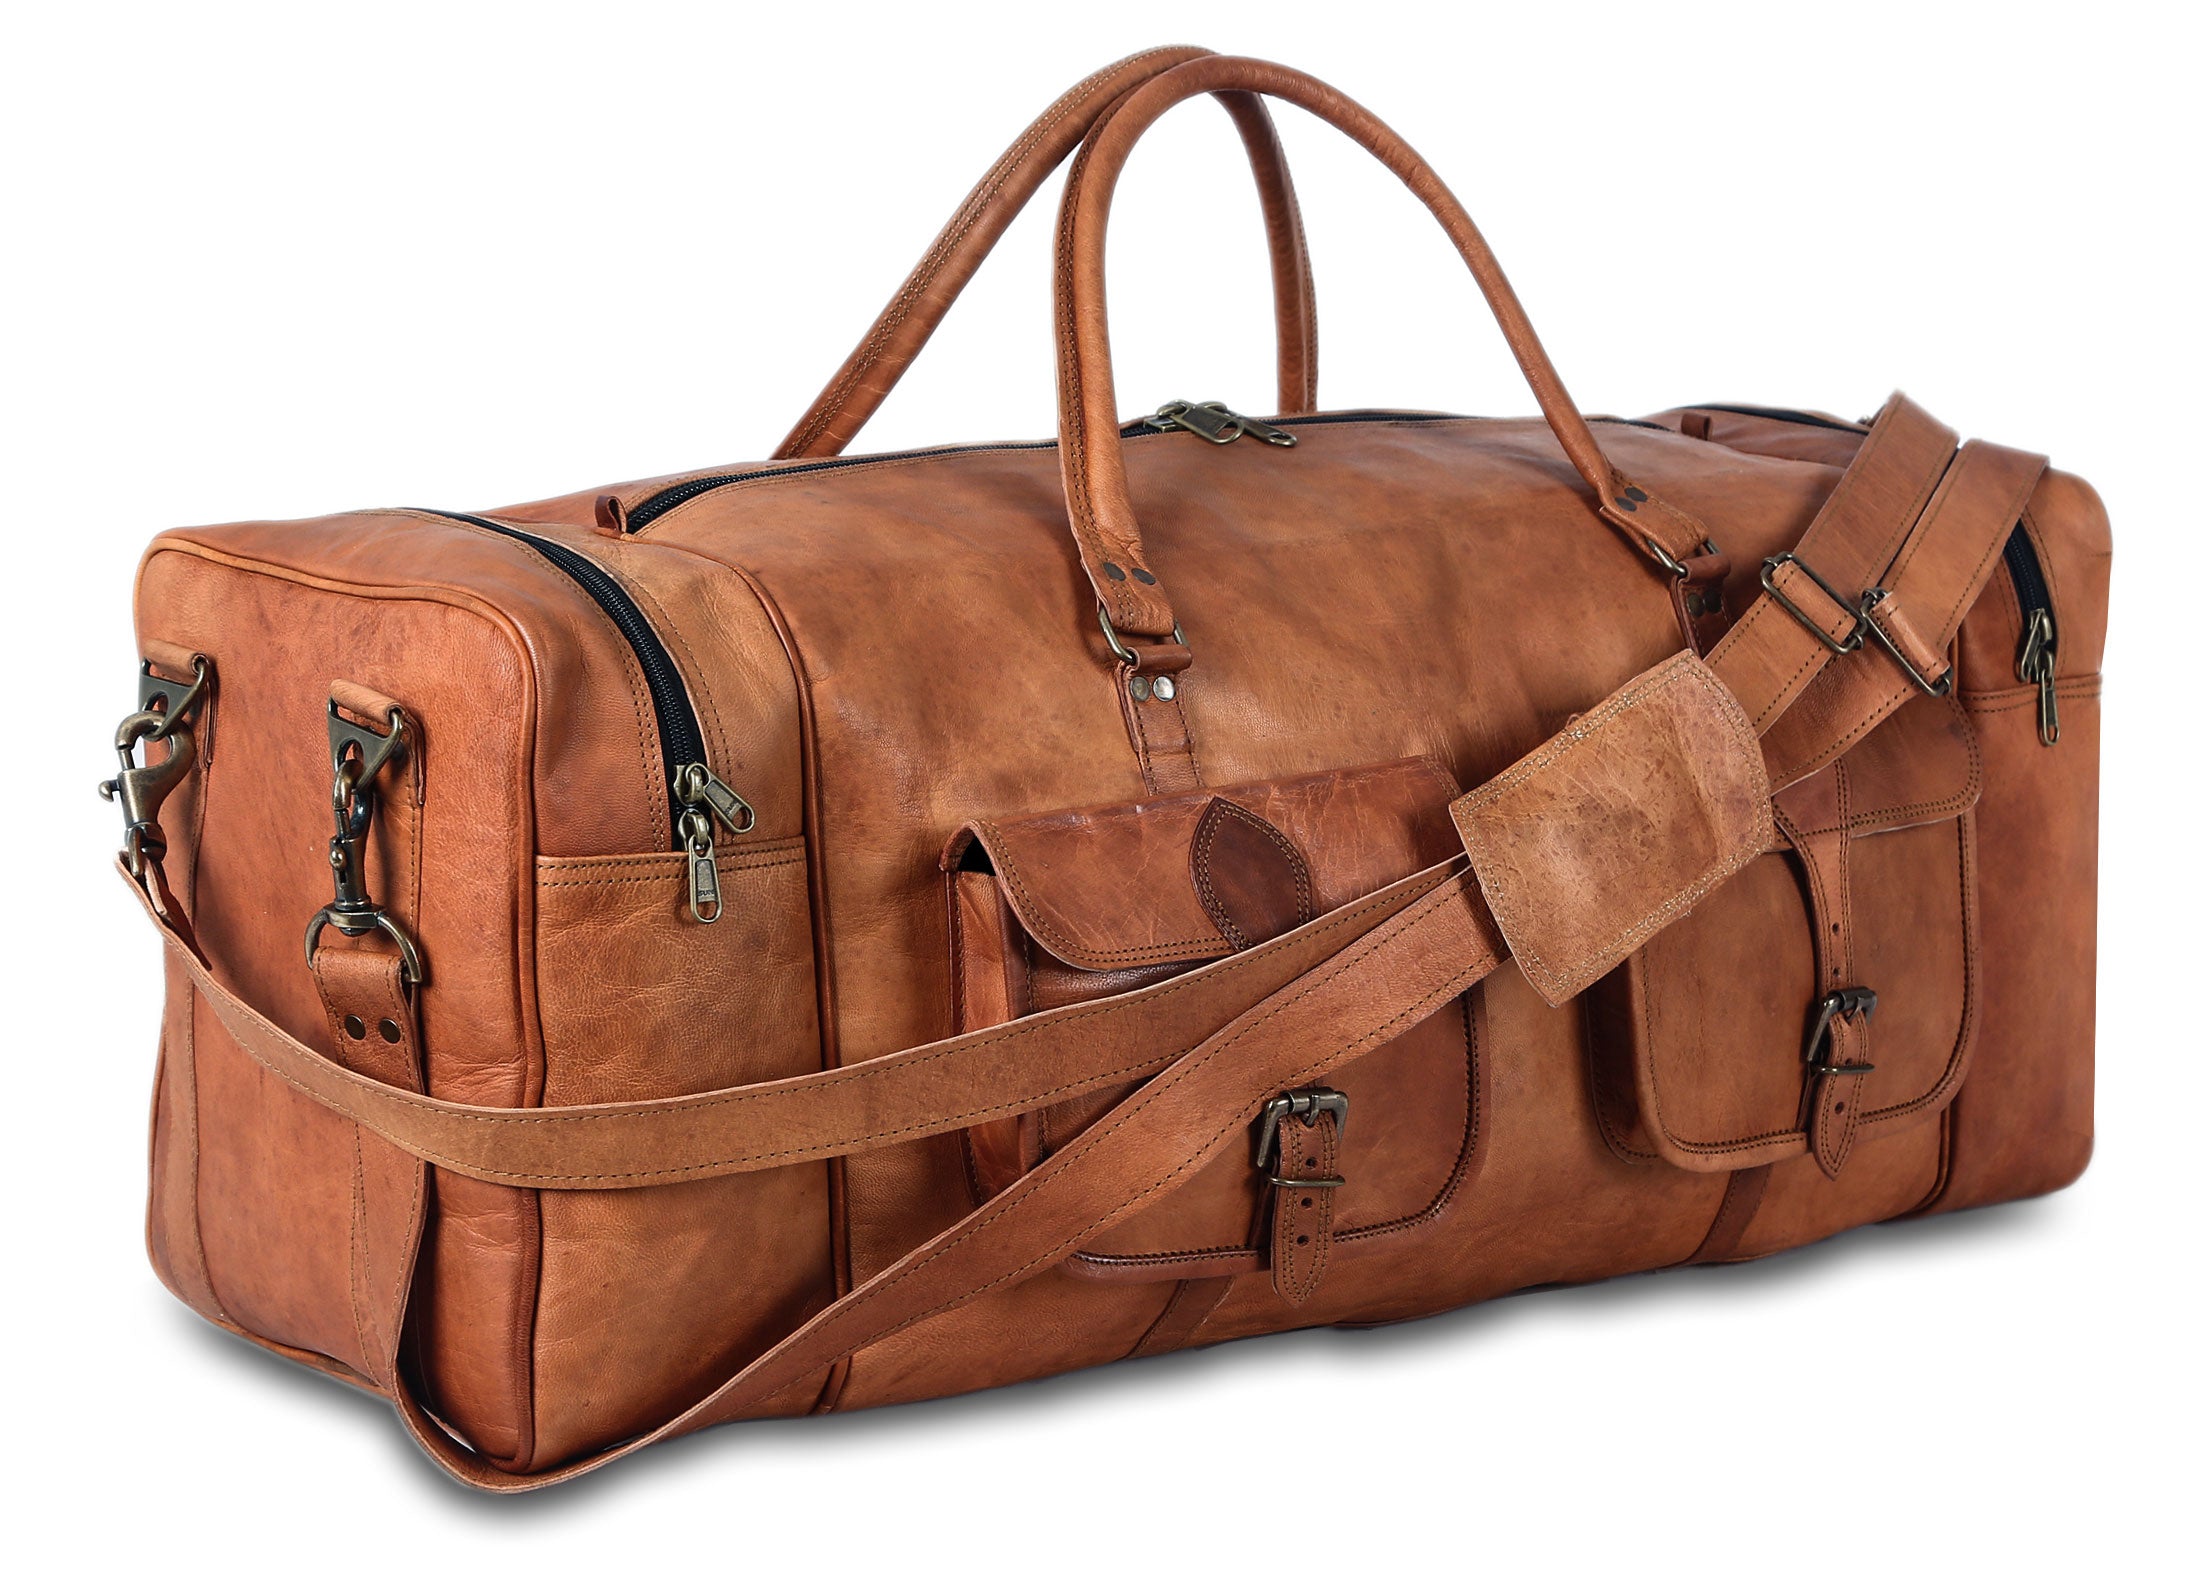 Komalc Leather Travel Duffle Bags for Men and Women Full Grain Leather Overnight Weekend Leather Bags Sports Gym Duffle. (Buffalo Distressed Tan)